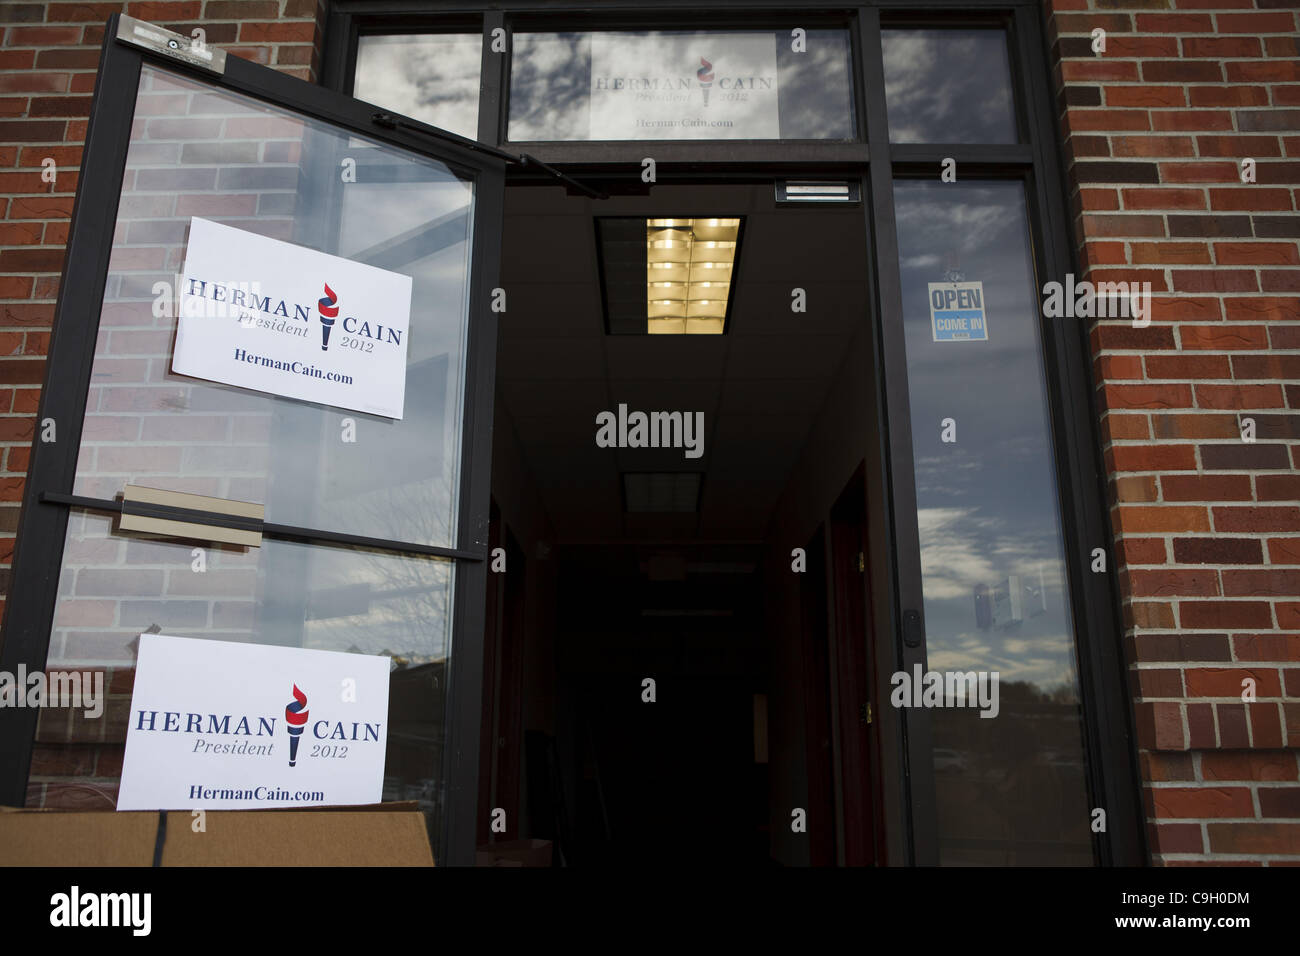 Dec. 31, 2011 - Urbandale, Iowa, U.S. - An ''Open, Come On In'' sign still hangs on the door as workers pack up boxes of signs and other materials from Republican Presidential candidate Herman Cain's campaign headquarters leading up to the Iowa Caucuses on Saturday, December 31, 2011 in Urbandale, I Stock Photo